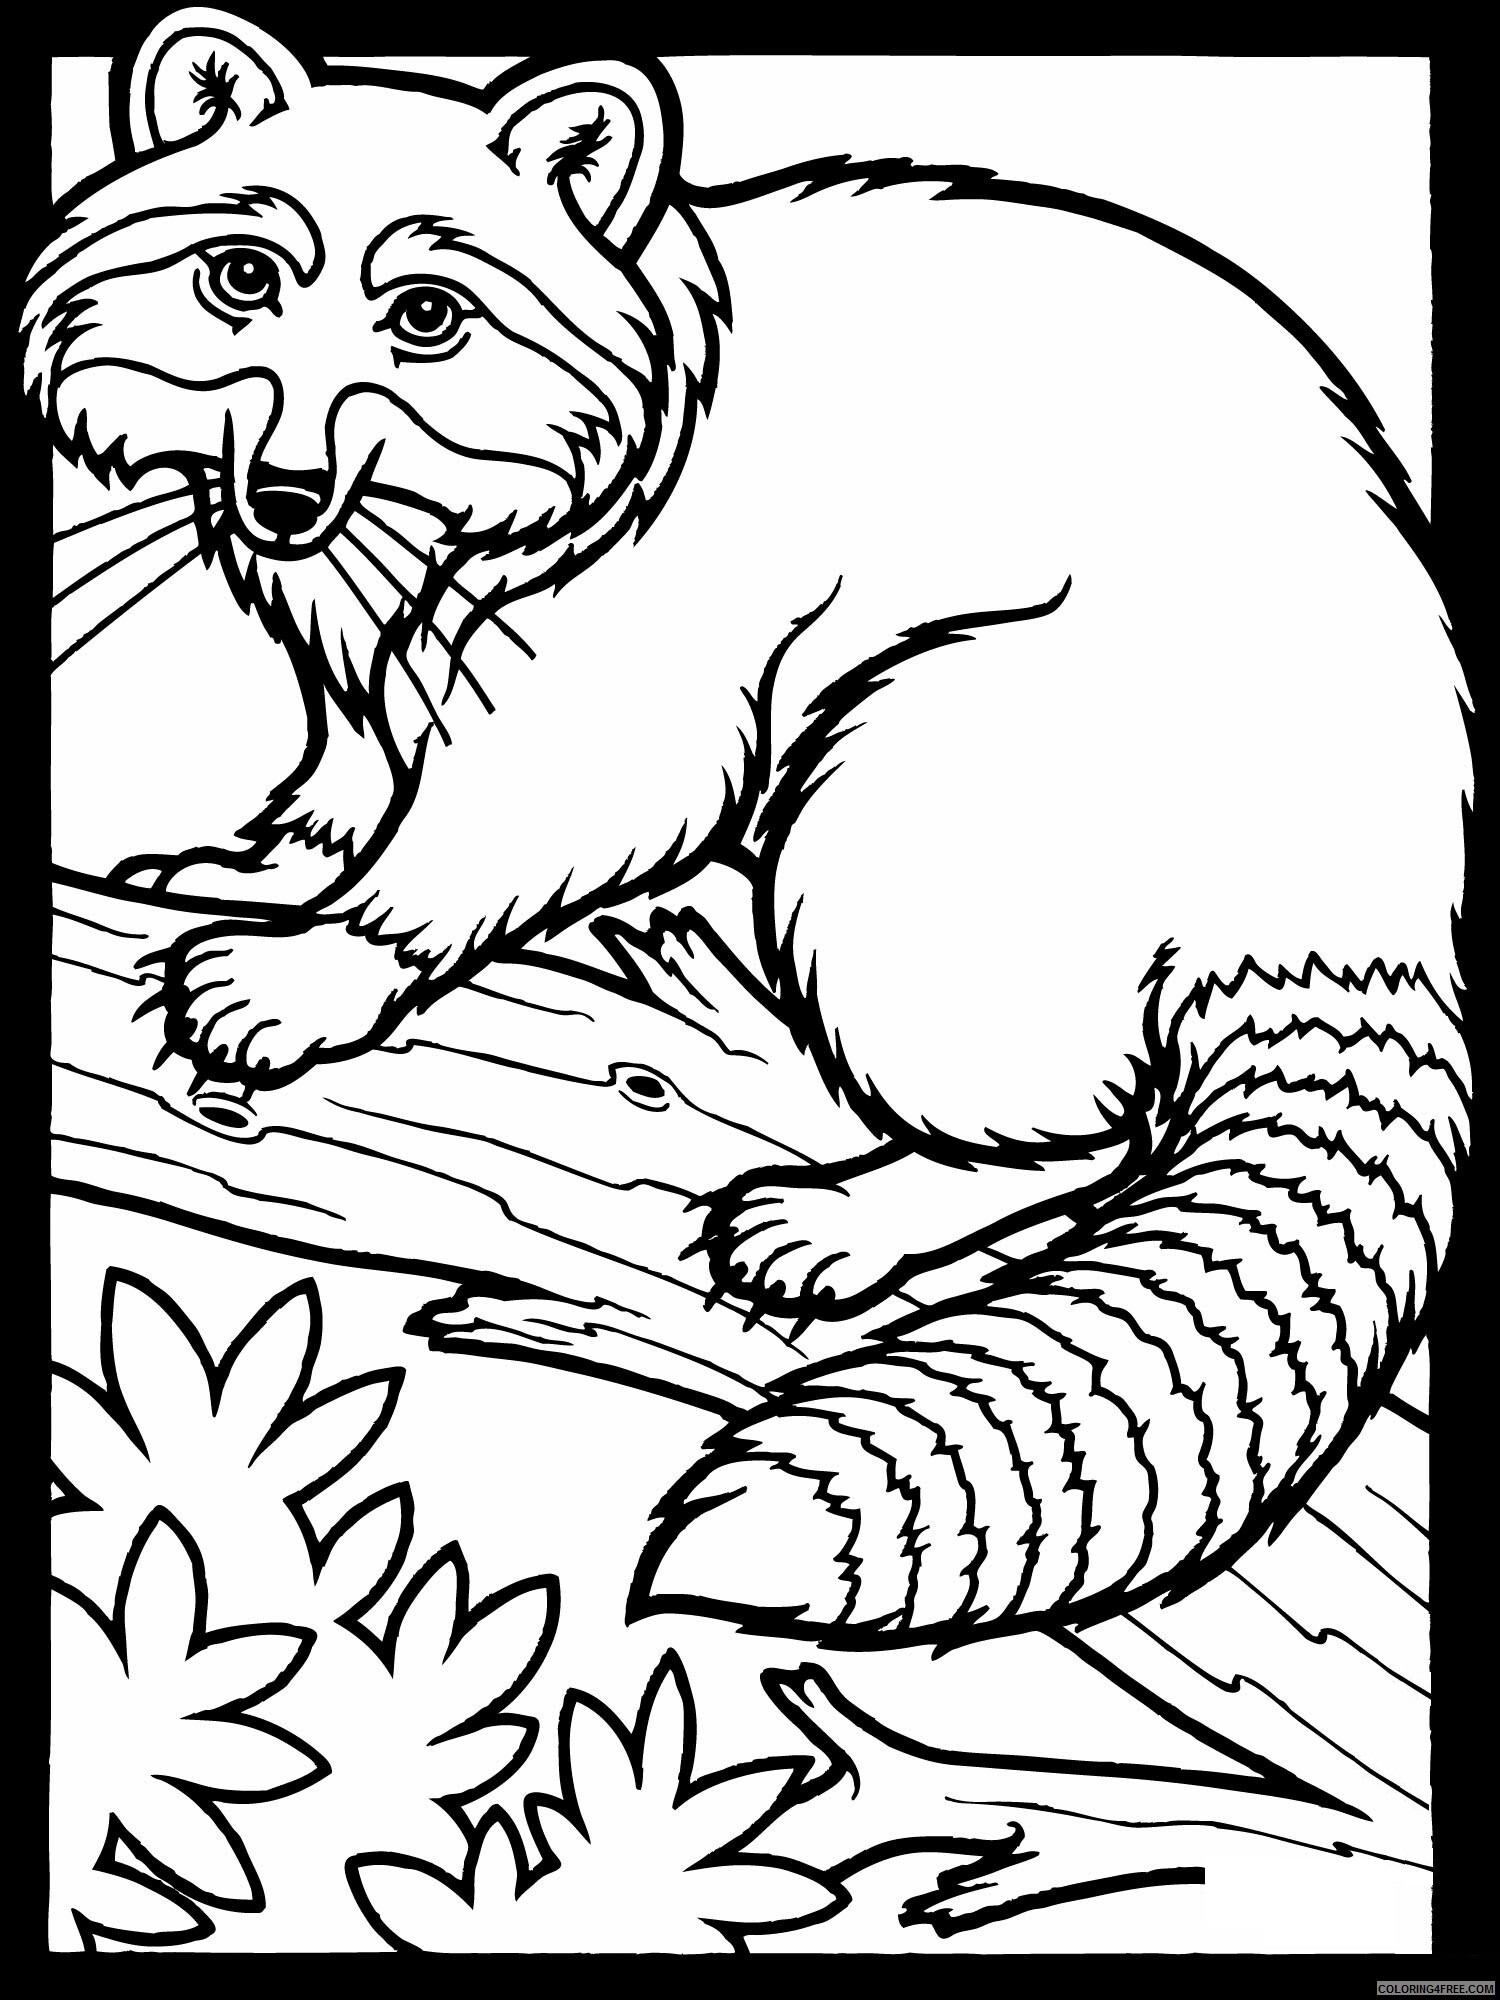 Raccoon Coloring Pages Animal Printable Sheets Raccoon Free 2021 4216 Coloring4free